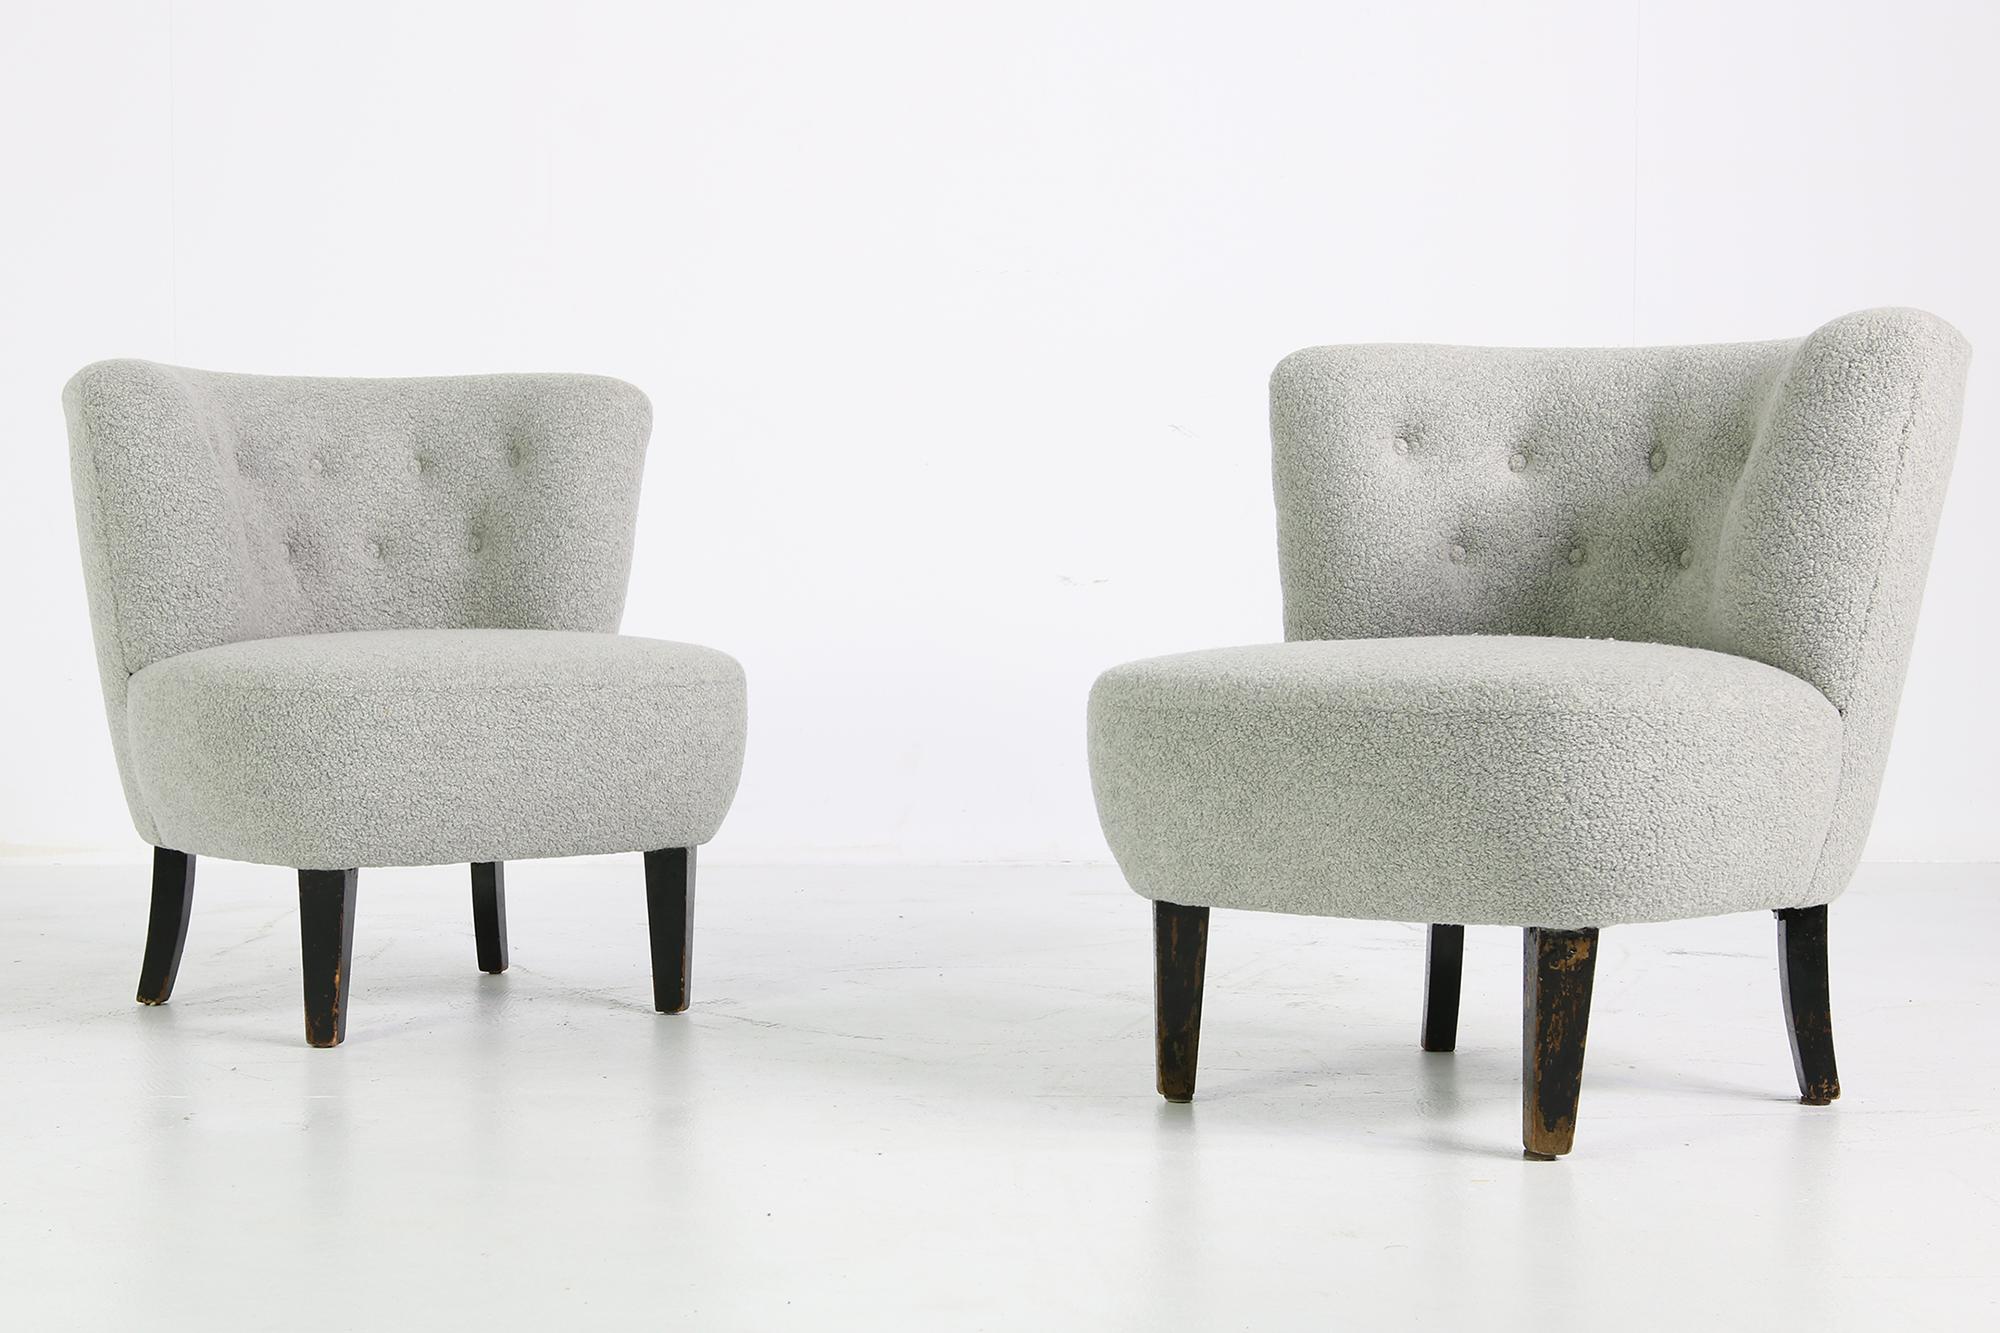 Pair of Curved Mid-Century Lounge Clam Chairs, Sweden 1950s, Boucle Fur, grey im Zustand „Gut“ in Hamminkeln, DE